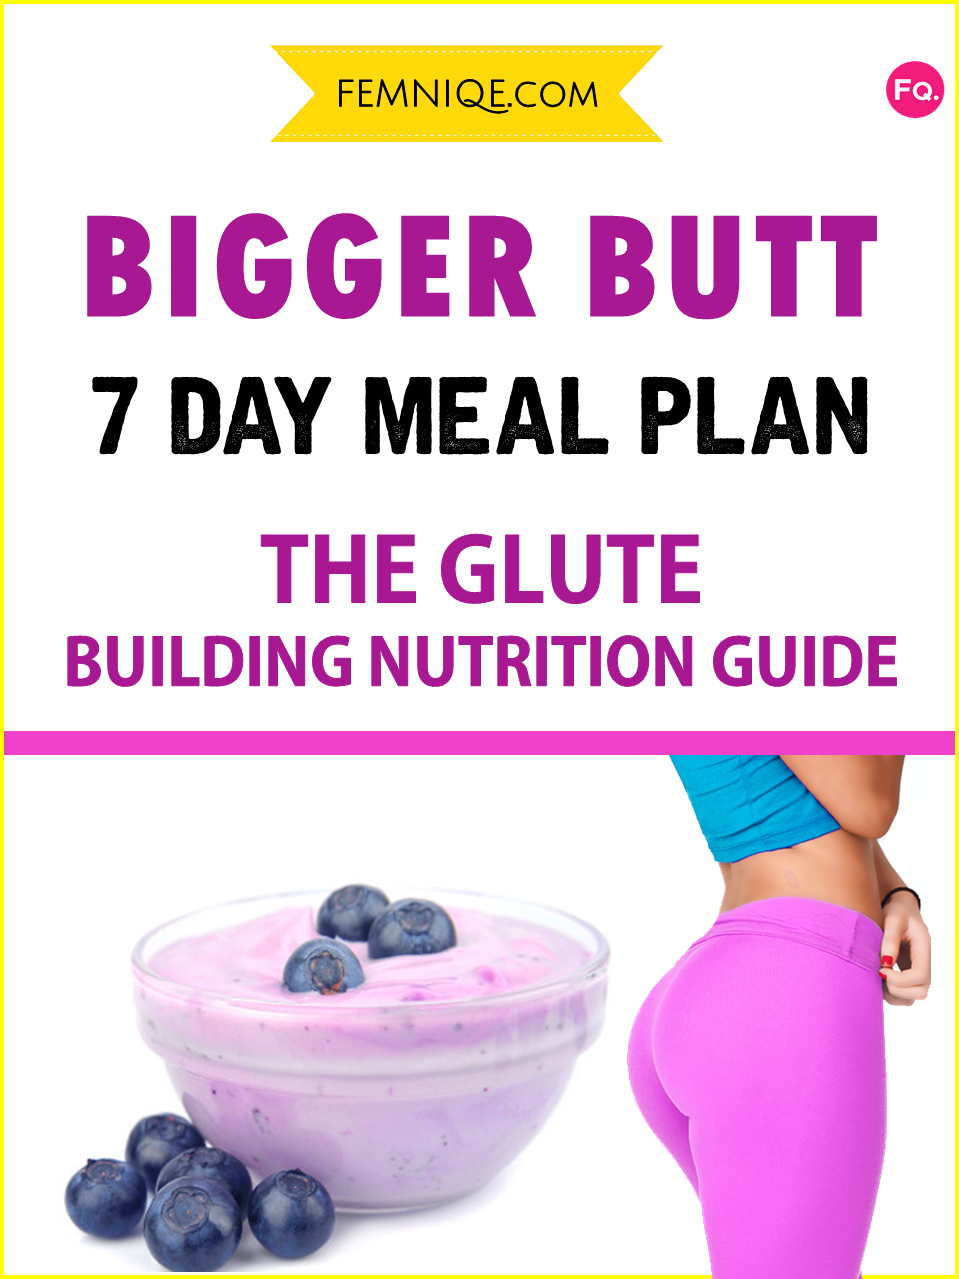 7 Day Bigger Butt Meal Plan (Complete Nutrition Guide) - Payhip